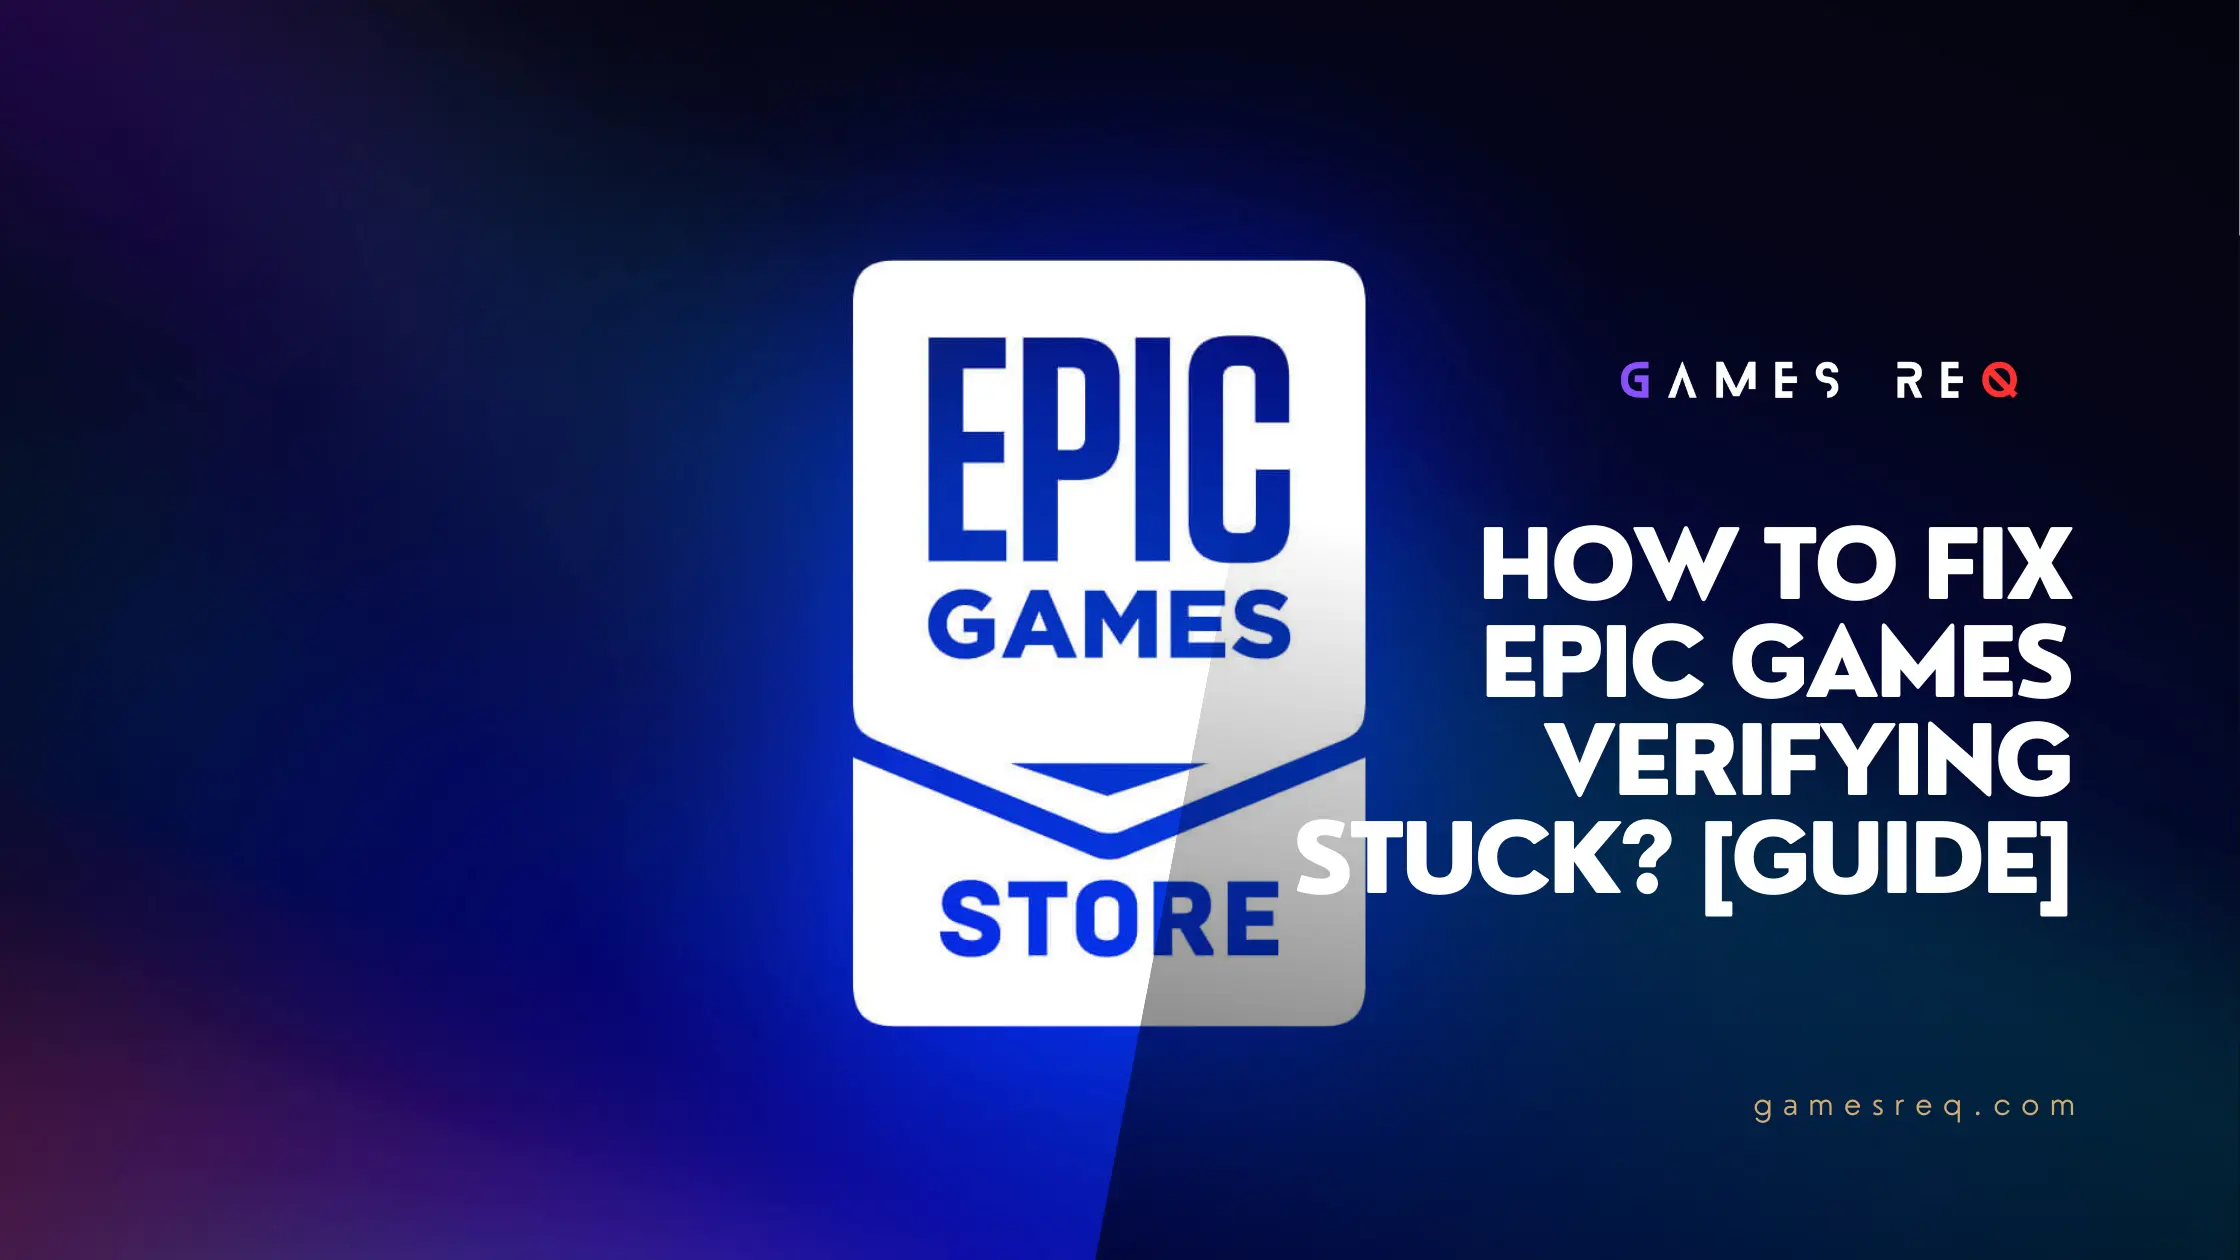 How To Fix Epic Games Verifying Stuck Guide